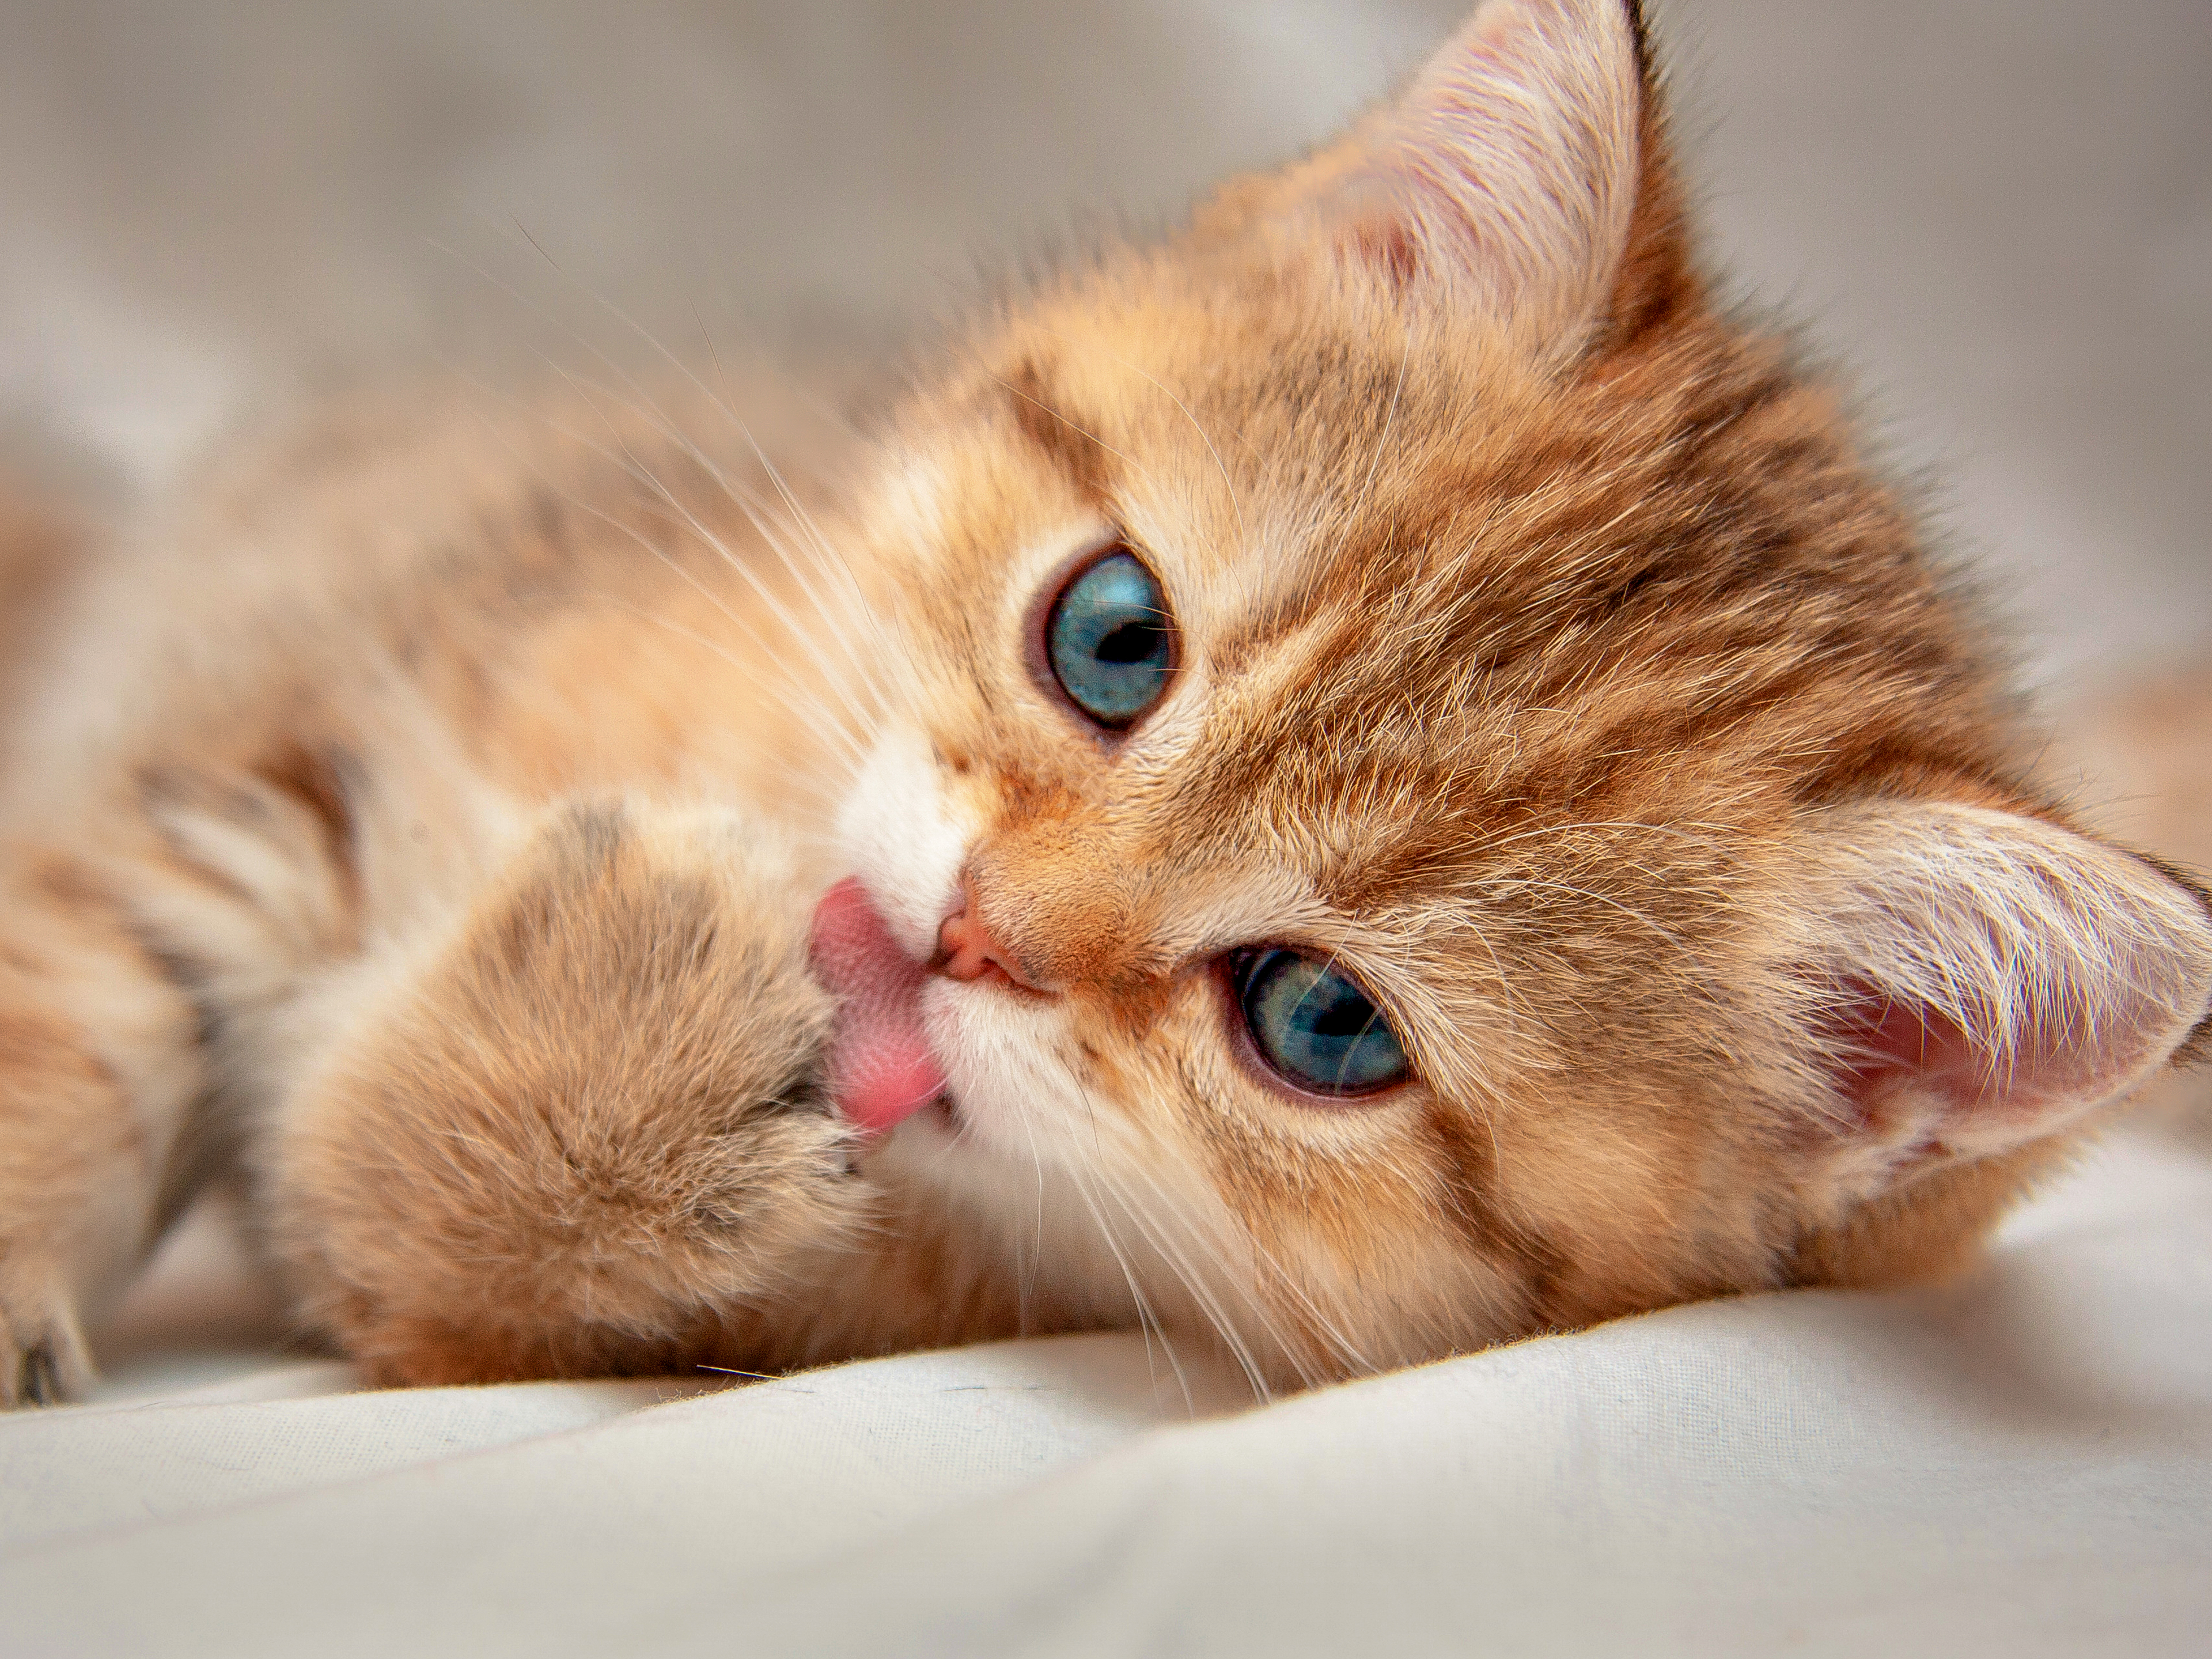 Kitten lying down on a white blanket licking its paw